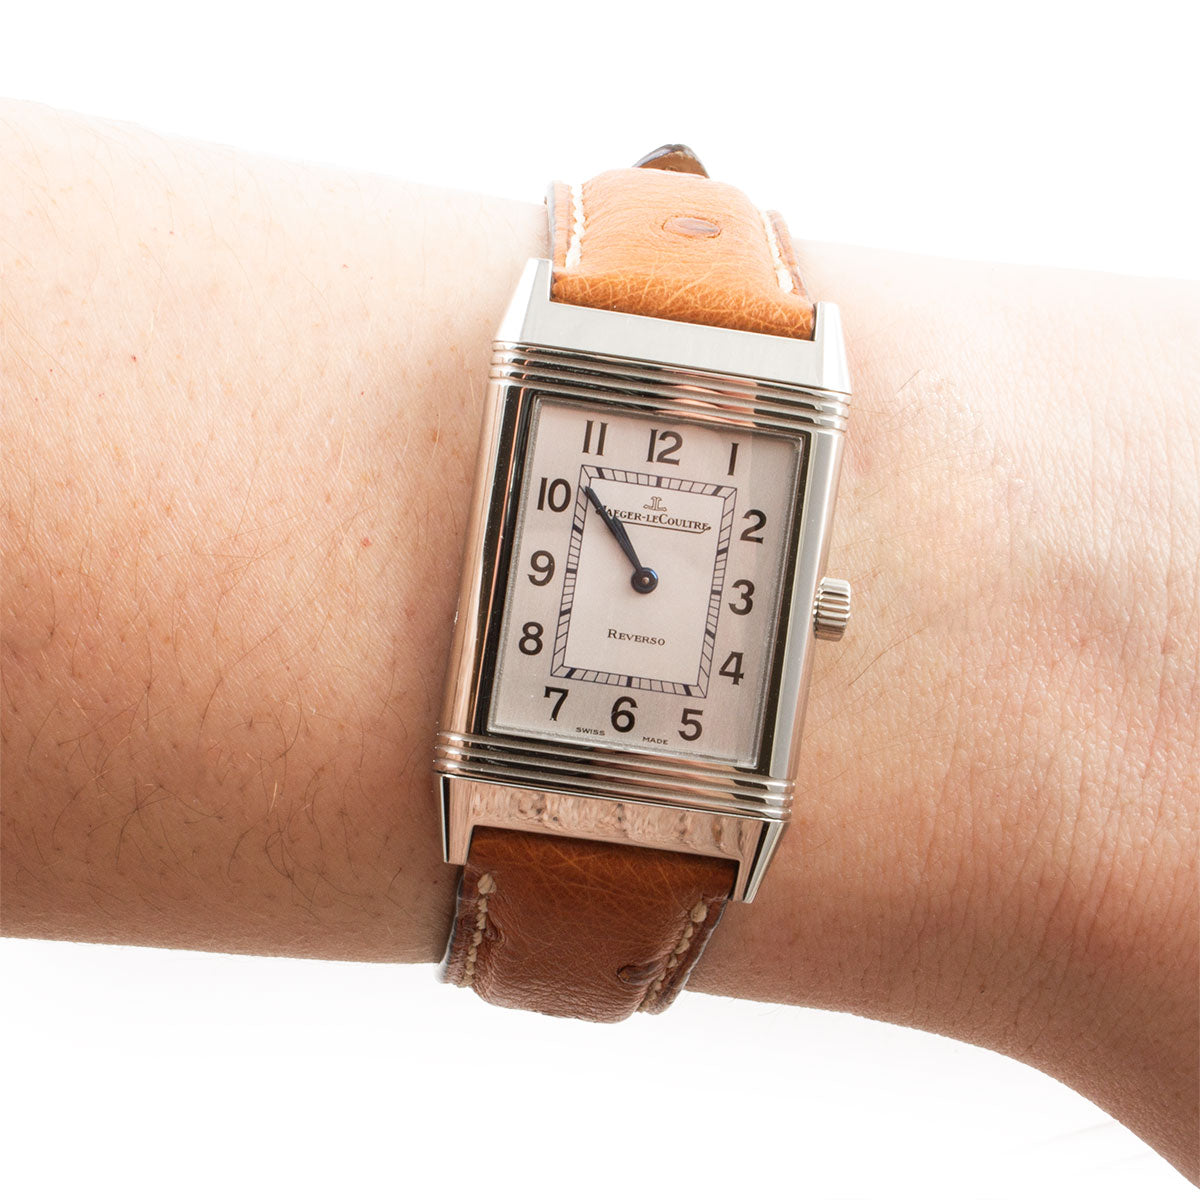 Second-hand watch - Jaeger Lecoultre - Reverso - 4400€